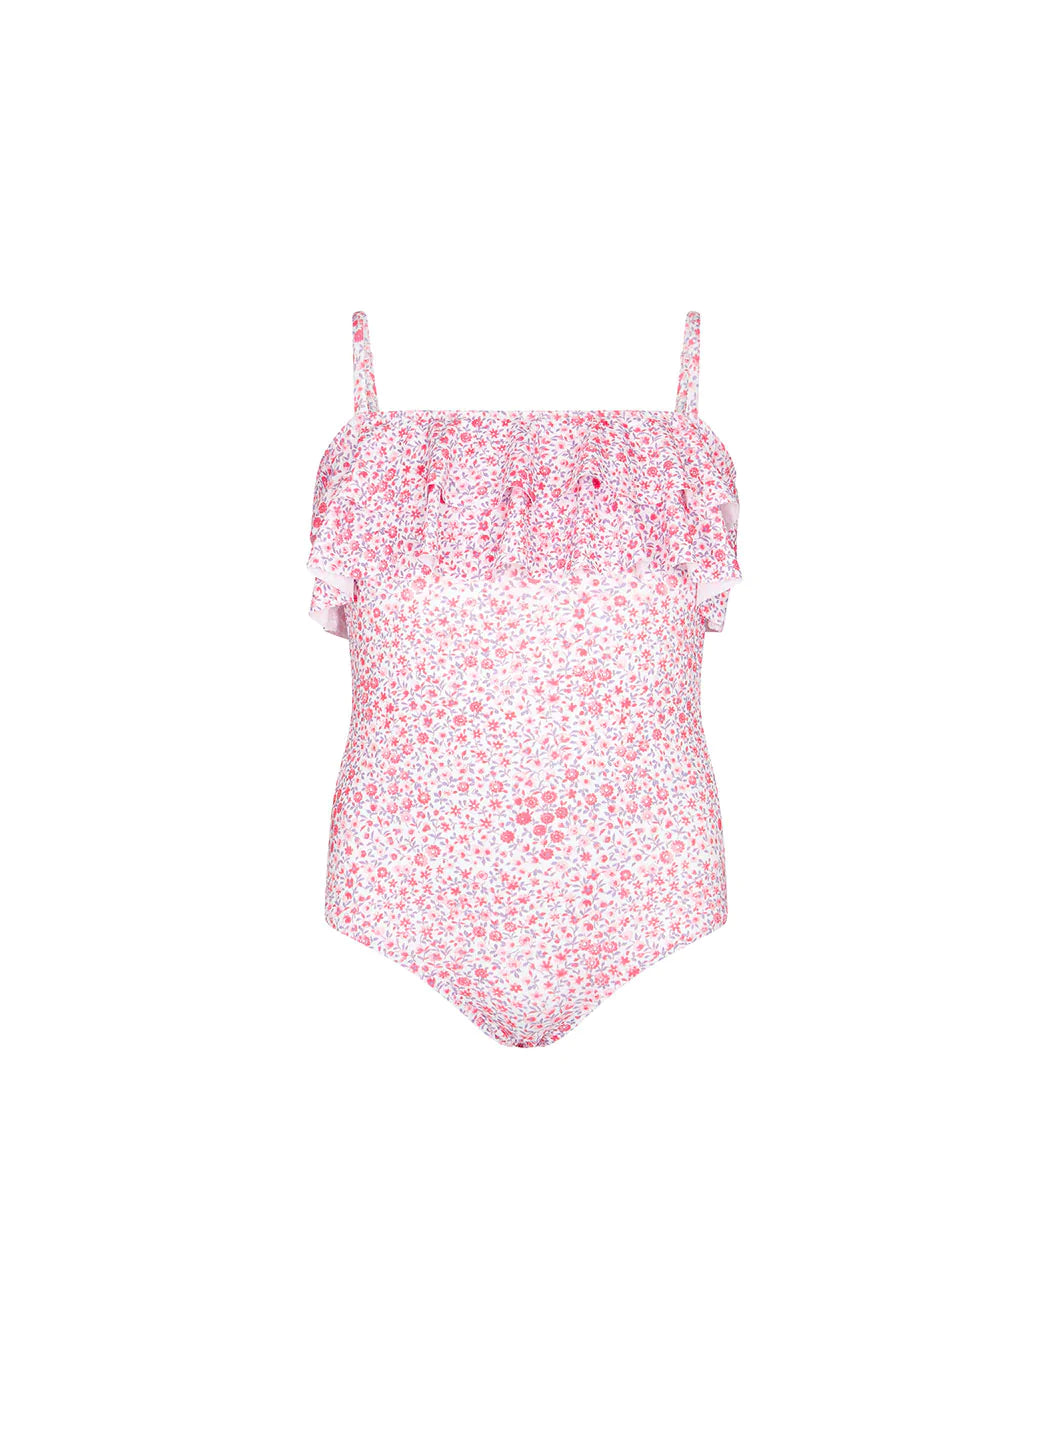 Baby Ivy Pink Floral Swimsuit